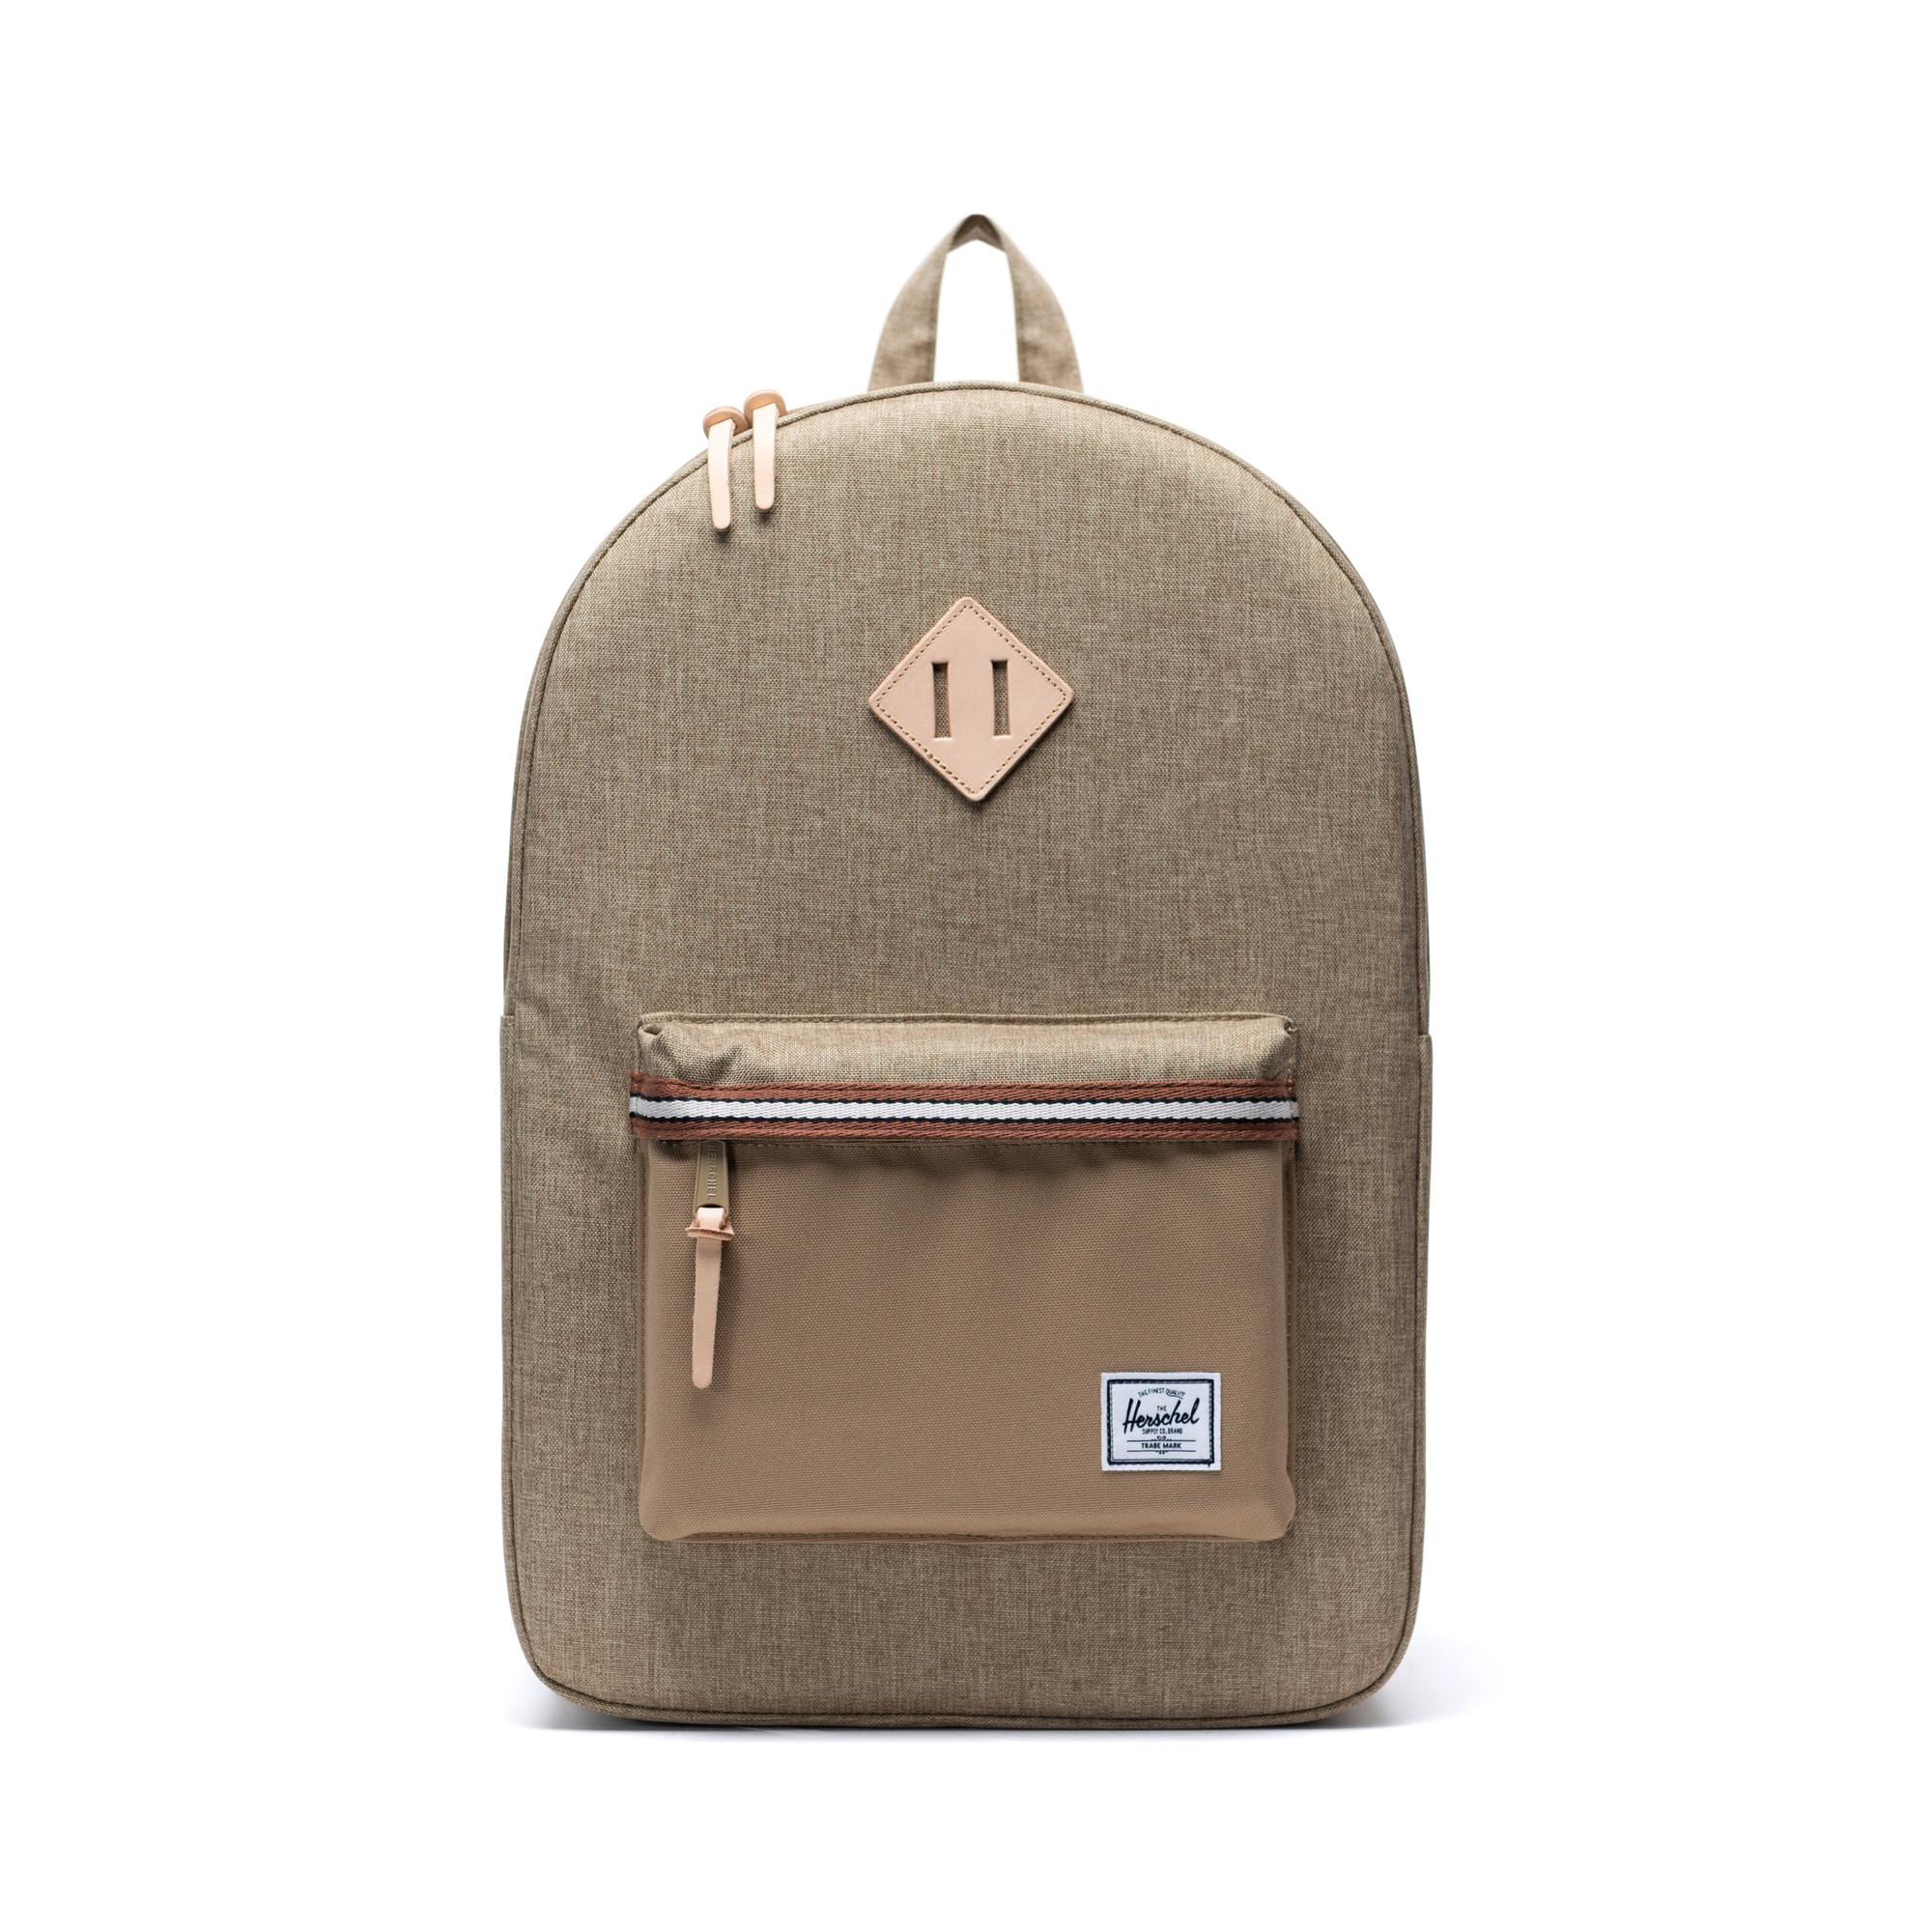 Chapter Travel Kit Woven | Herschel Supply Company